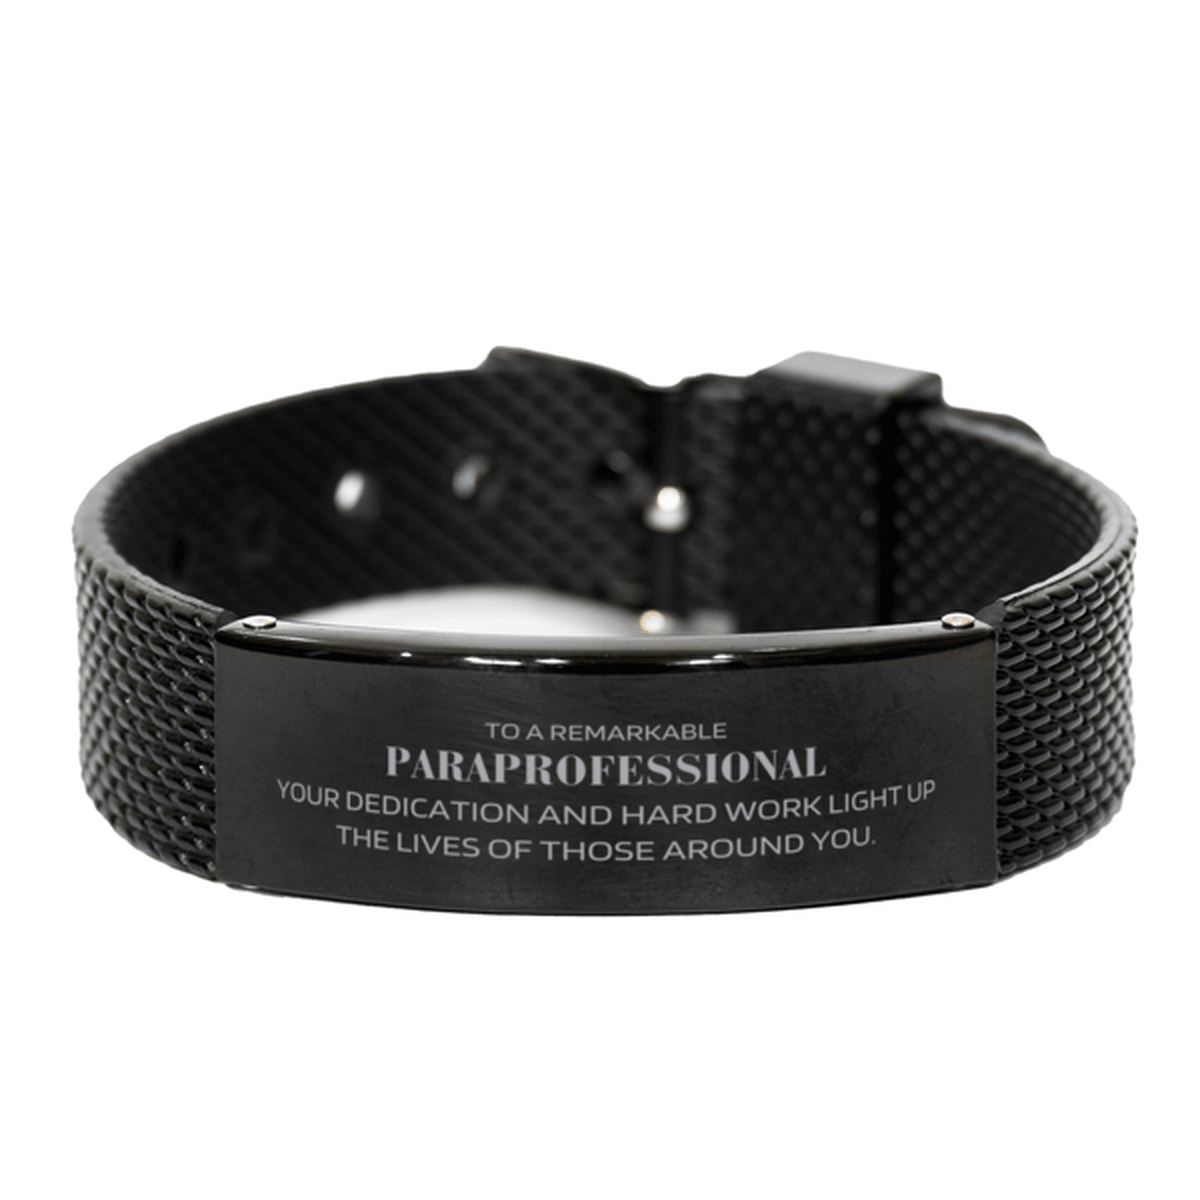 Remarkable Paraprofessional Gifts, Your dedication and hard work, Inspirational Birthday Christmas Unique Black Shark Mesh Bracelet For Paraprofessional, Coworkers, Men, Women, Friends - Mallard Moon Gift Shop